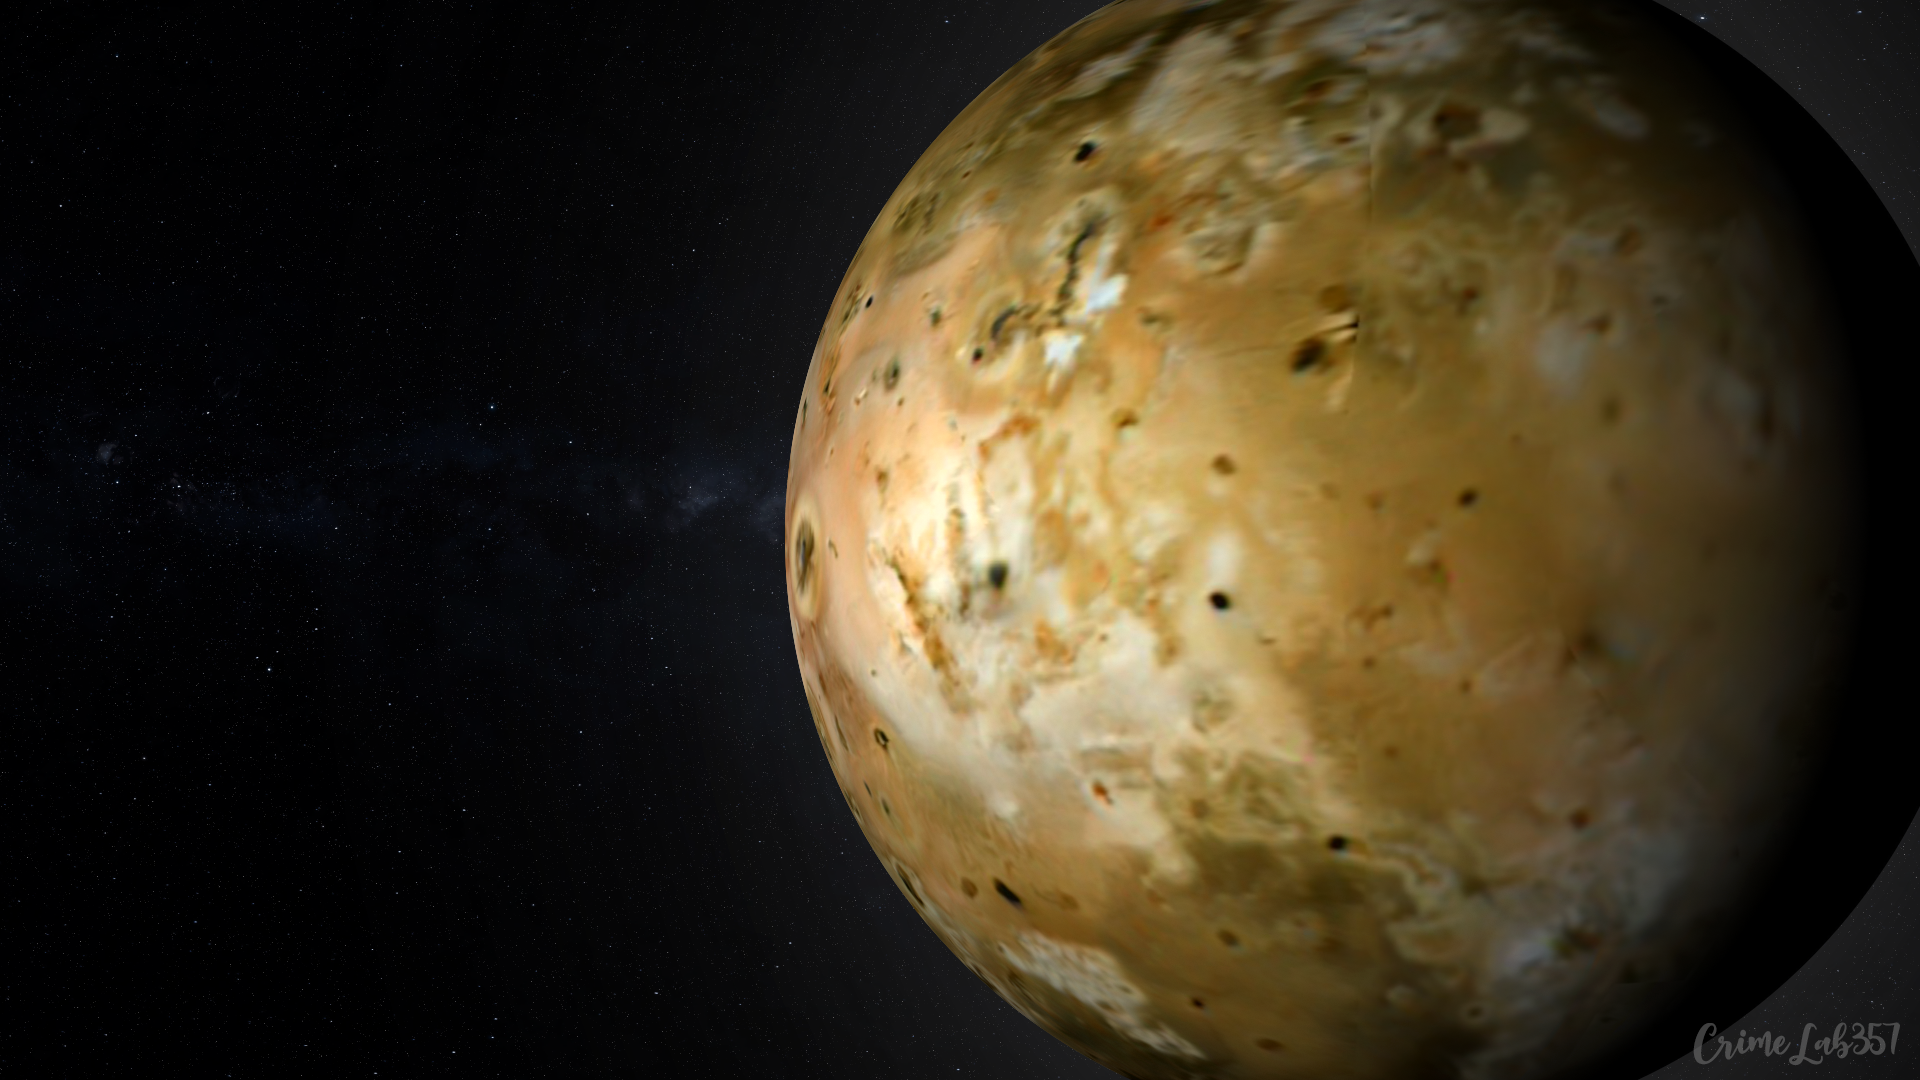 Planet Io Moon 3D Graphics Watermarked 1920x1080